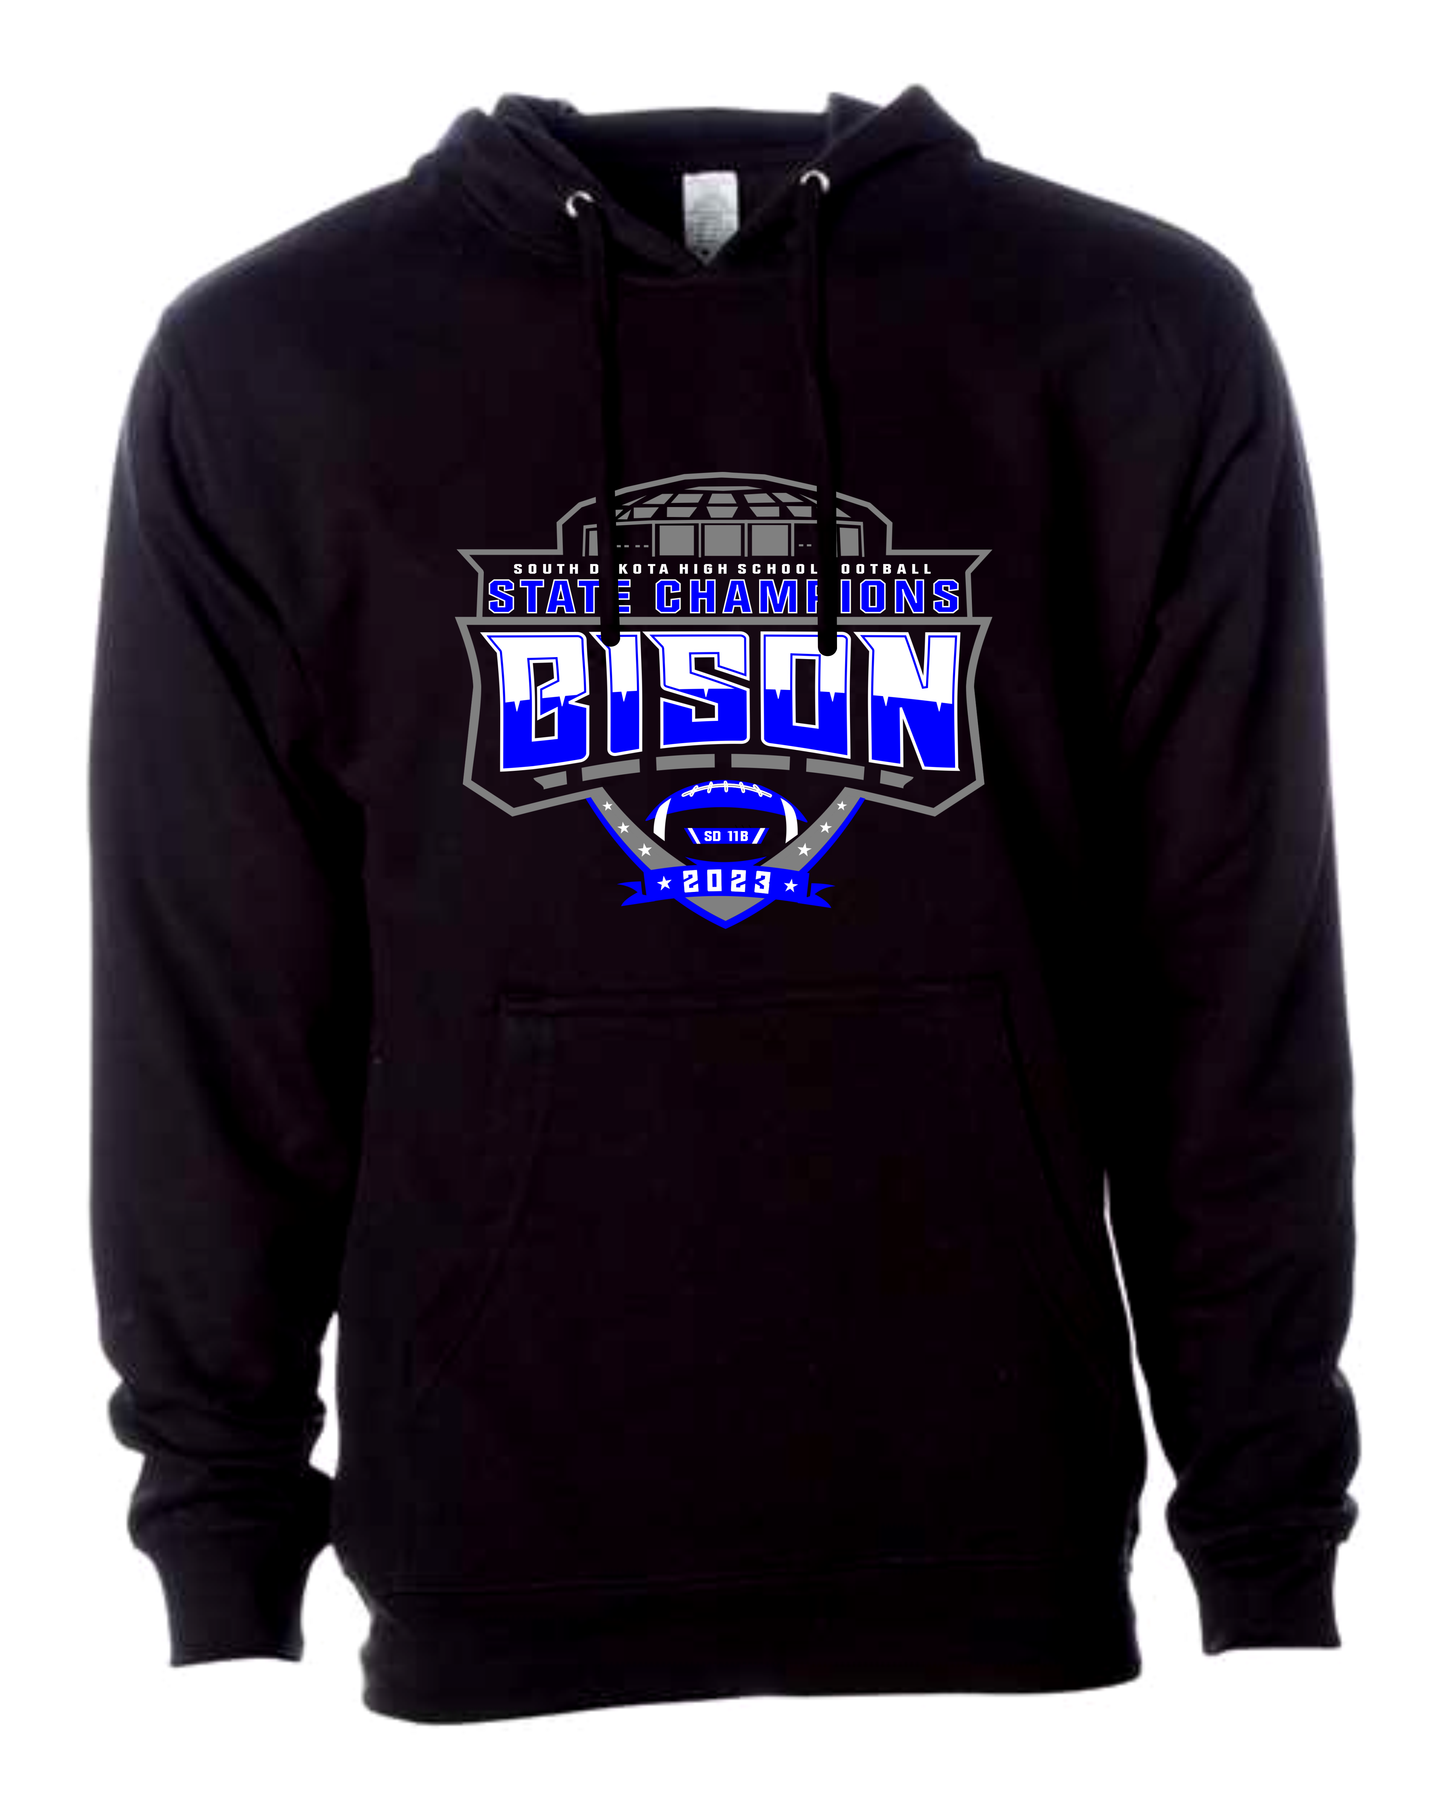 Bison Independent Trading Co. - Midweight Hooded Sweatshirt